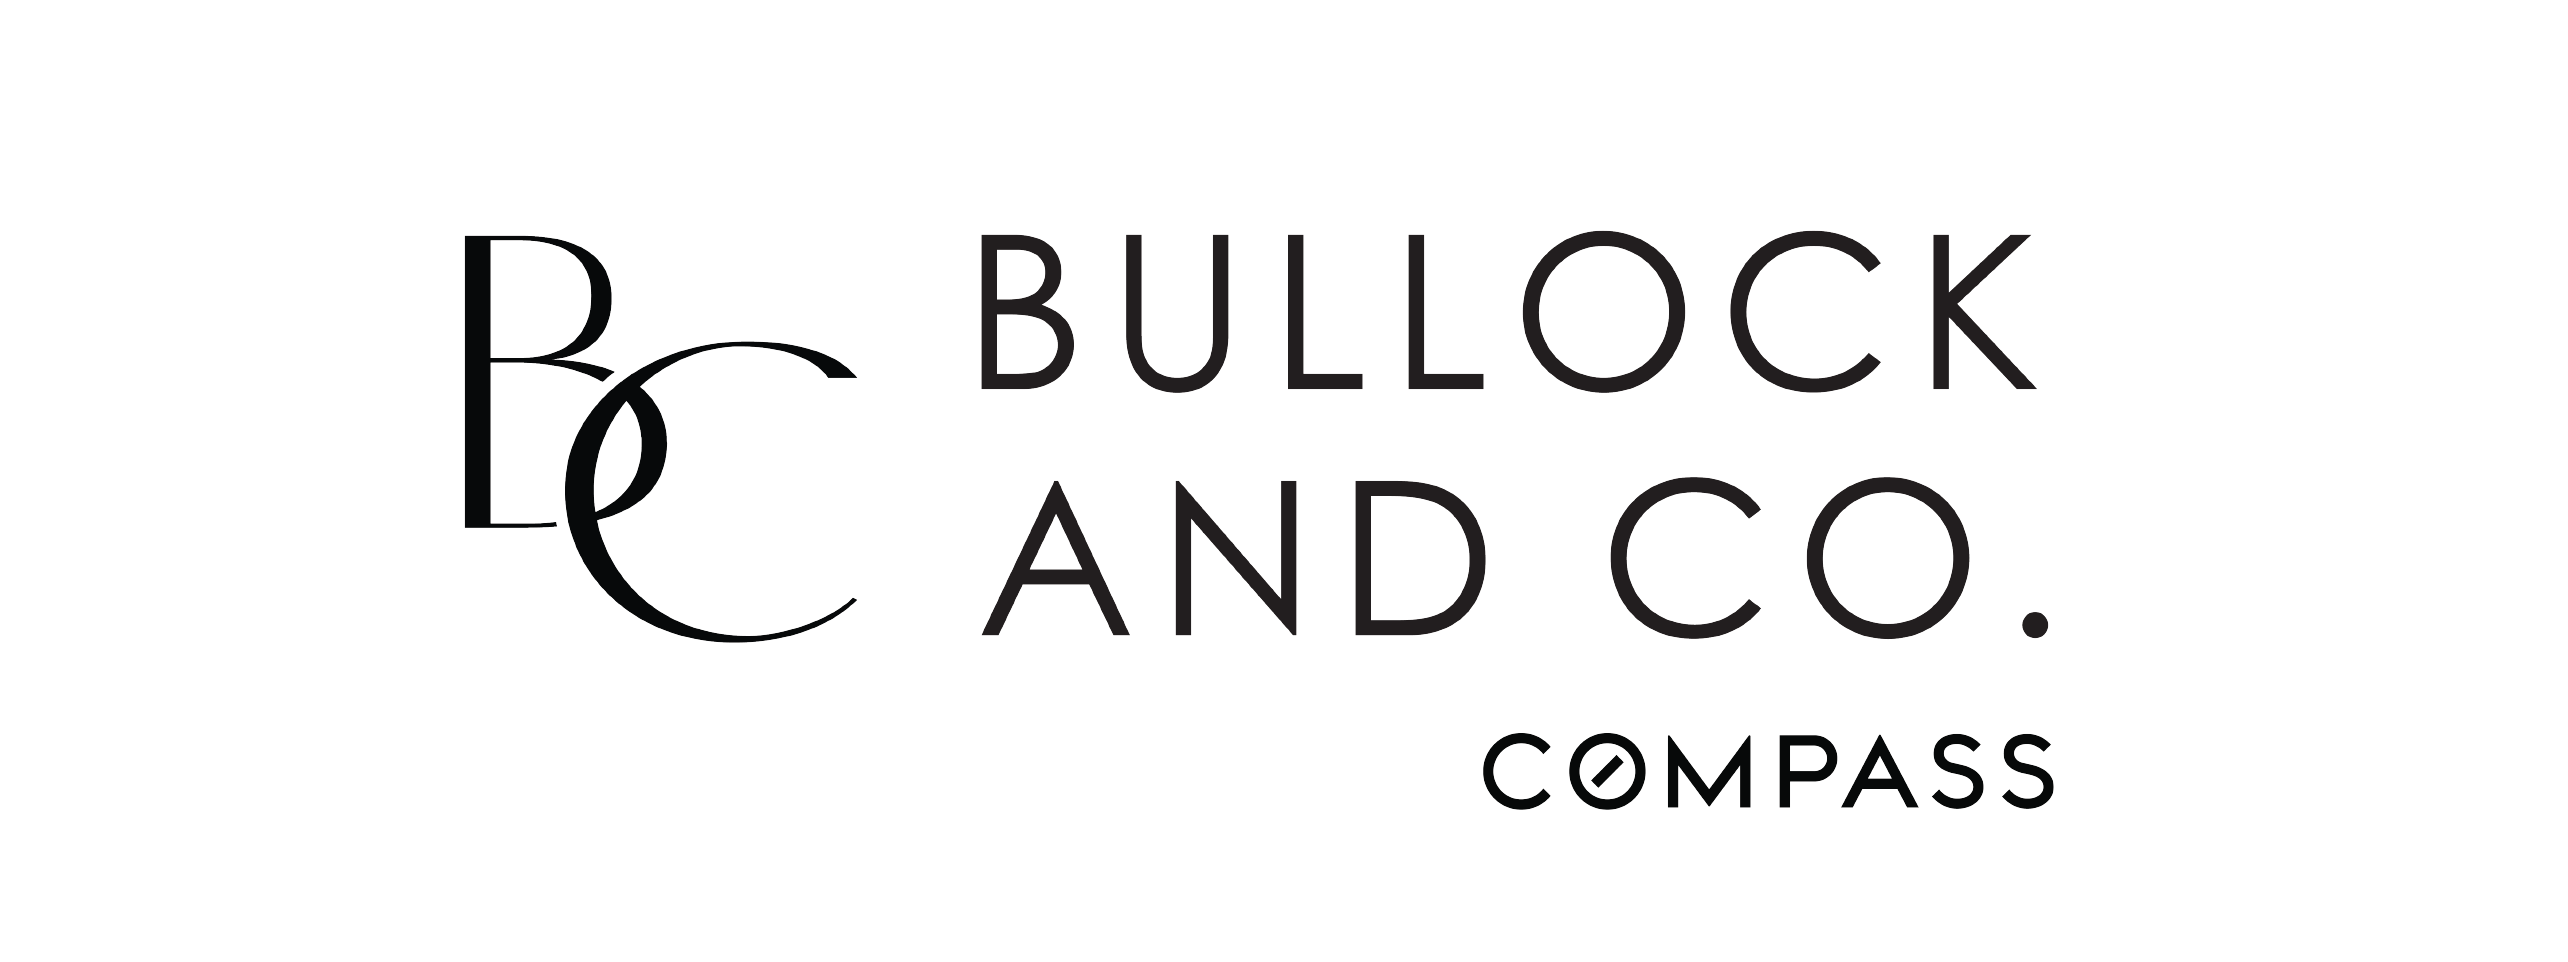 A text banner with the word BULLOCK.